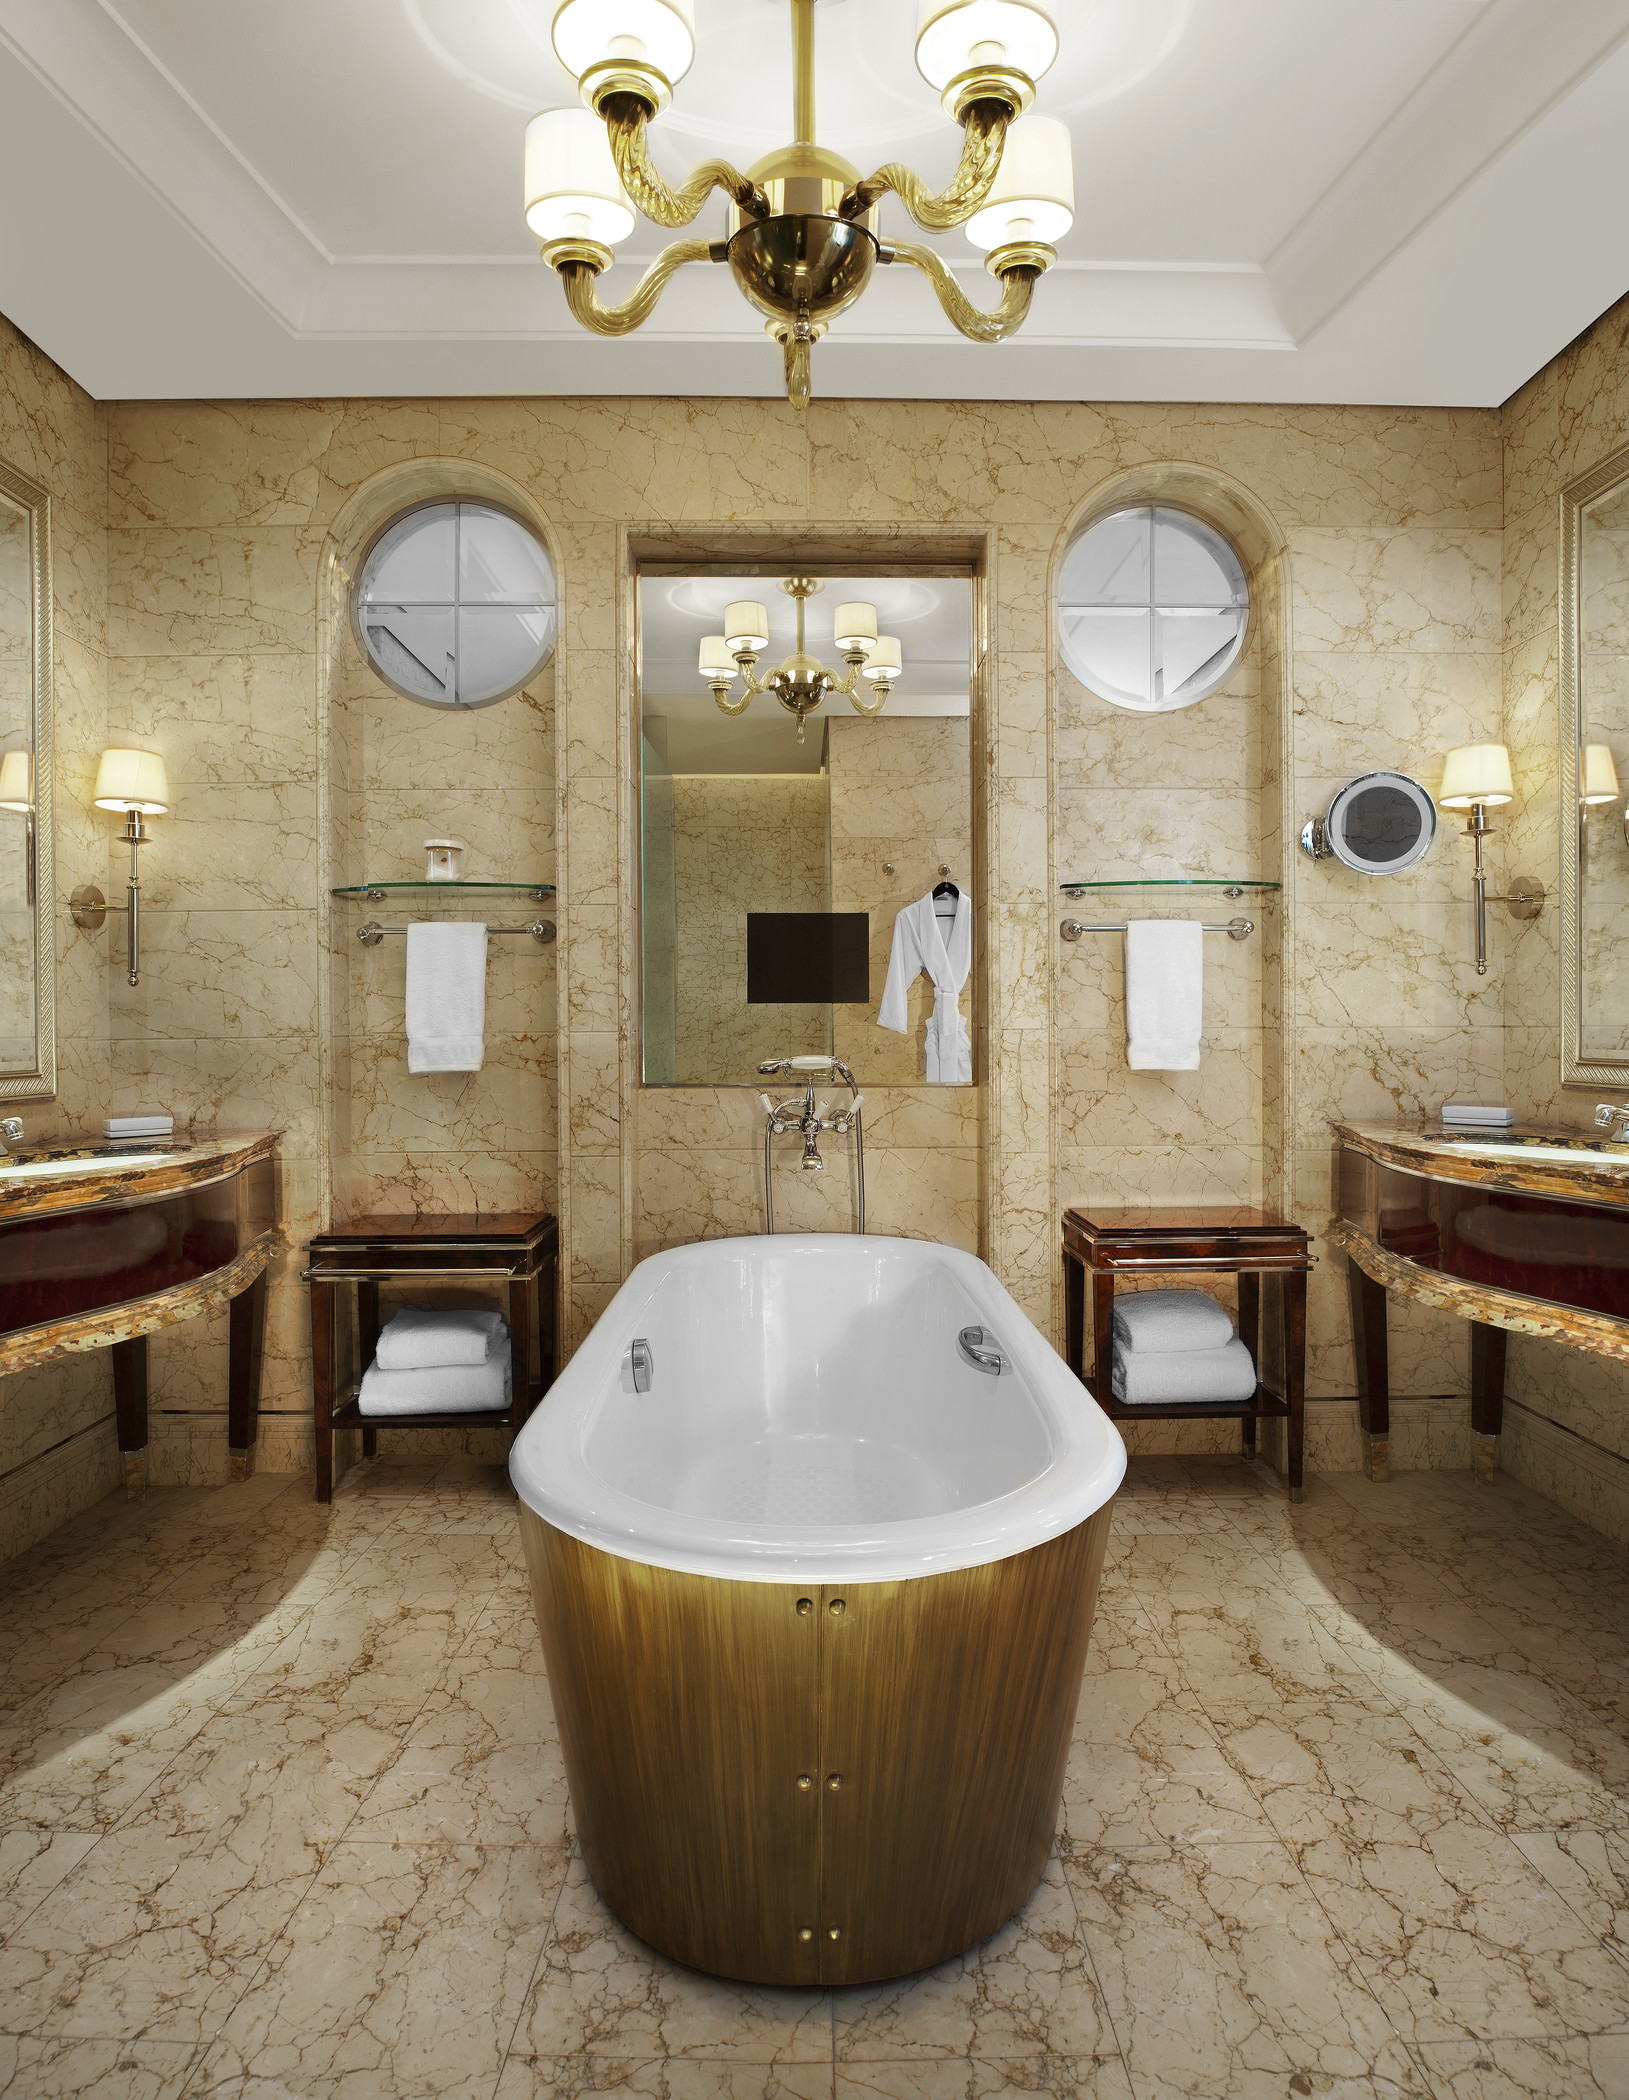 Freestanding Bathtub featured in every room and suite